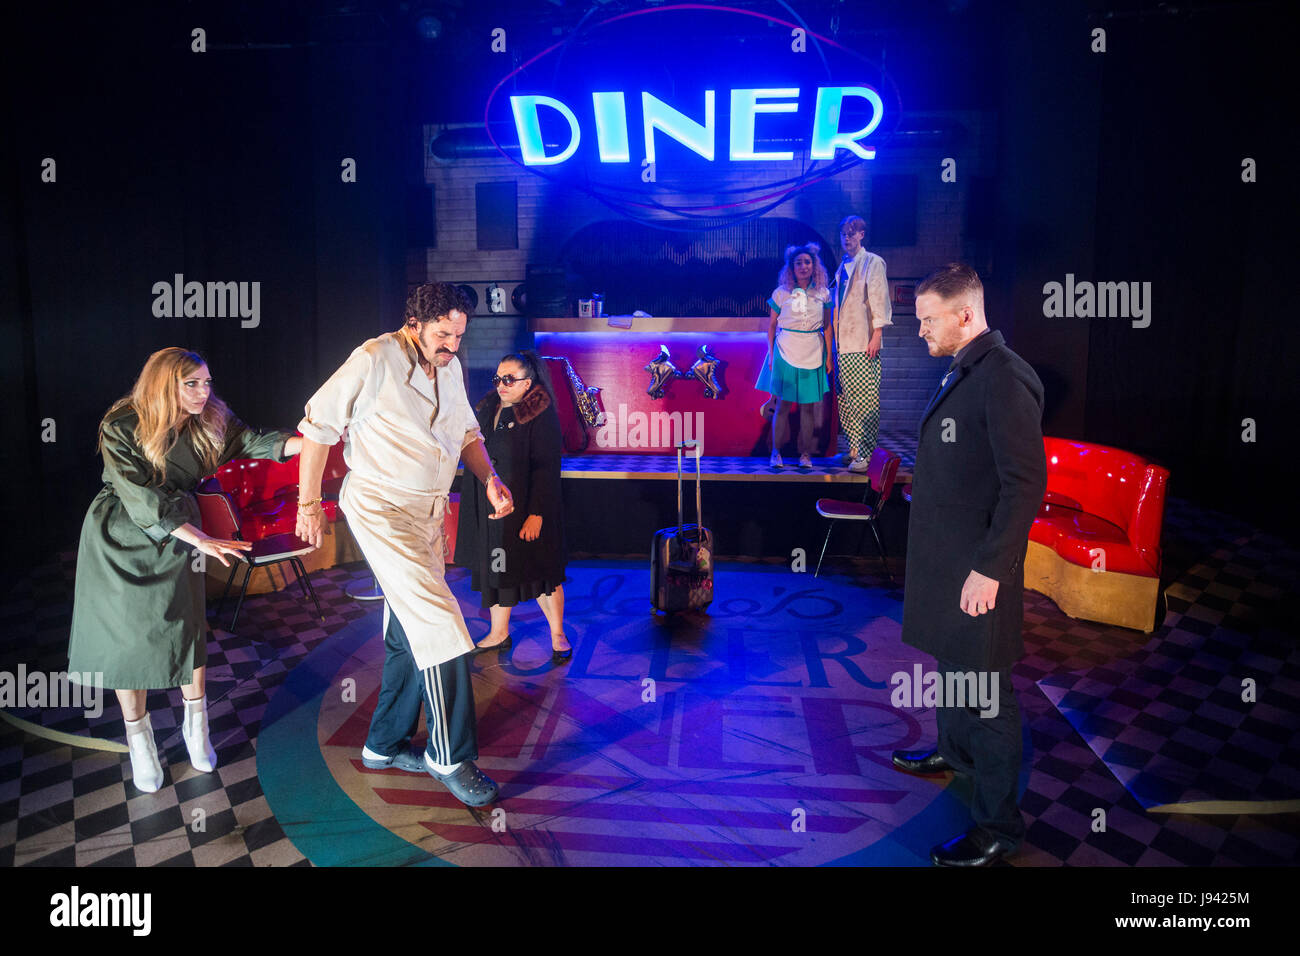 London, UK. 30 May 2017. Pictured L-R: Lucy McCormick, Rina Fatania, Joe Dixon, Lucie Shorthouse, Ricky Oakley, David Thaxton. Soho Theatre presents the UK Premiere of the 2015 Verity Bargate award-winning musical comedy Roller Diner, Home of the Full English Brexit, written by Stephen Jackson and directed by Soho Theatre's artistic director Steve Marmion. Cast: Lucy McCormick (Marika Malinsky), Joe Dixon (Eddie), David Thaxton (Roger), Rina Fatania (Jean), Lucie Shorthouse (Chantal) and Ricky Oakley (PJ). Performances run from 26 May to 24 June 2017. Stock Photo